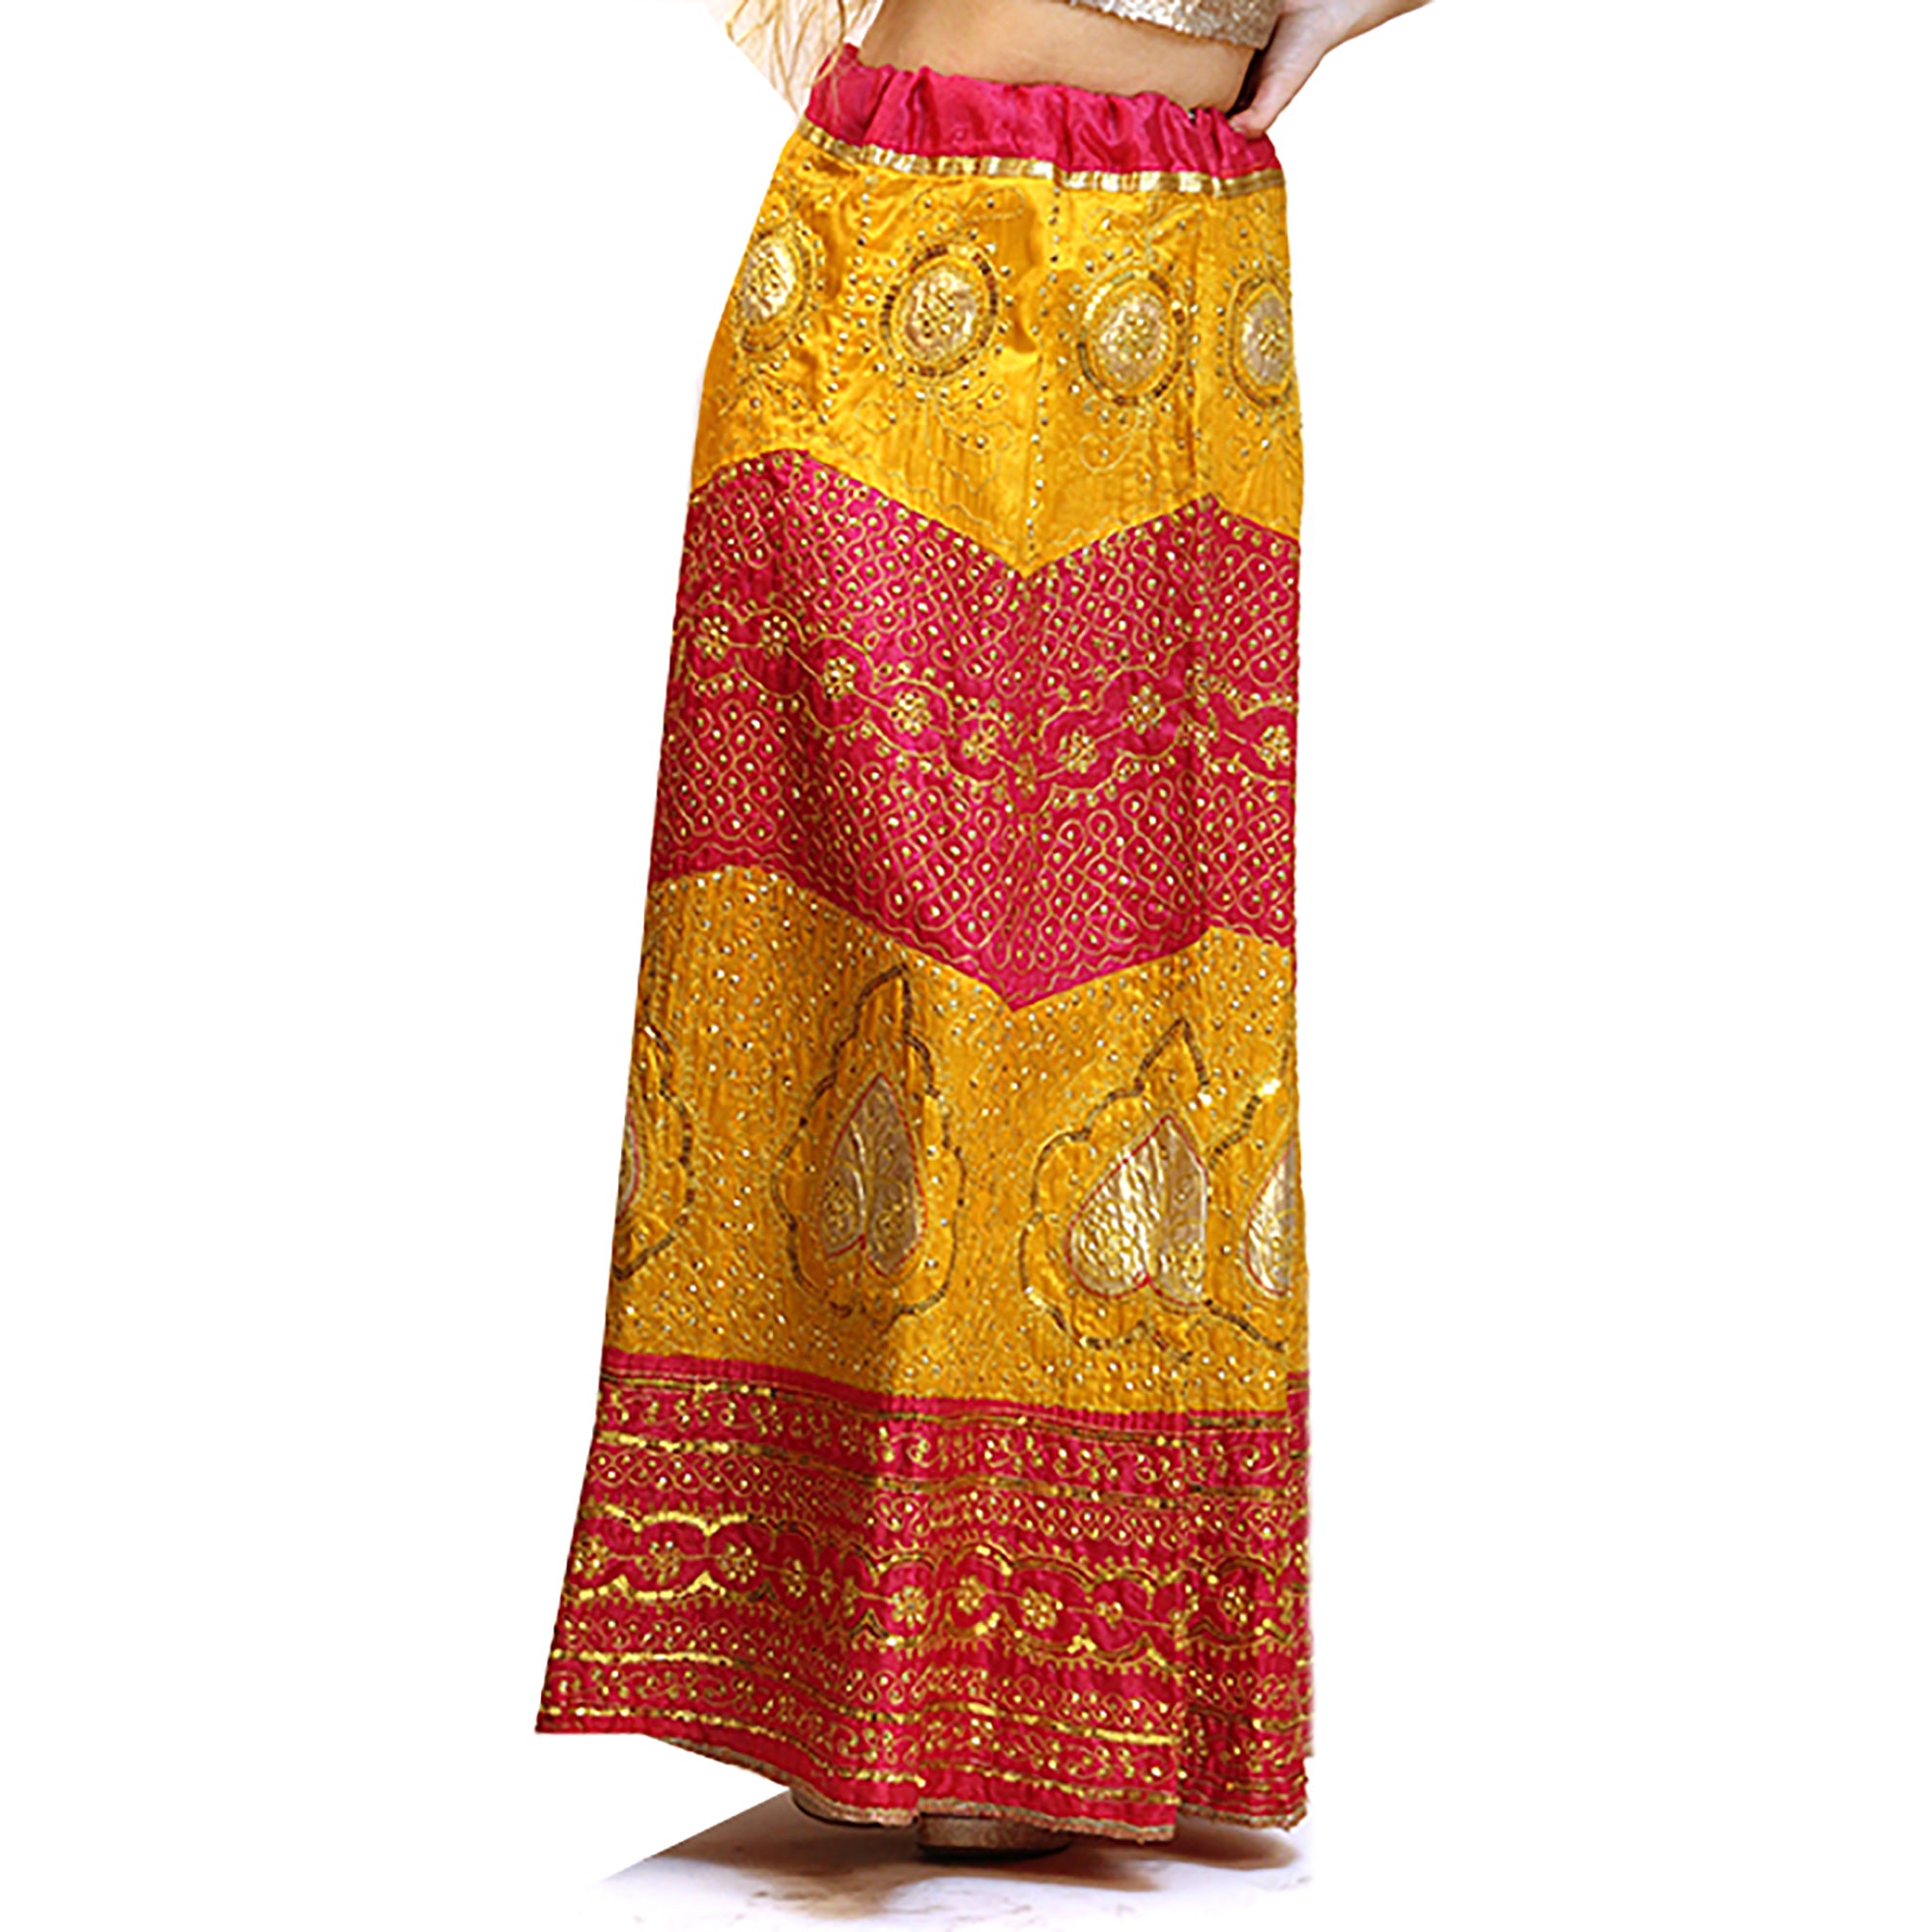 Red and gold embroidered skirt - Vintage India NYC